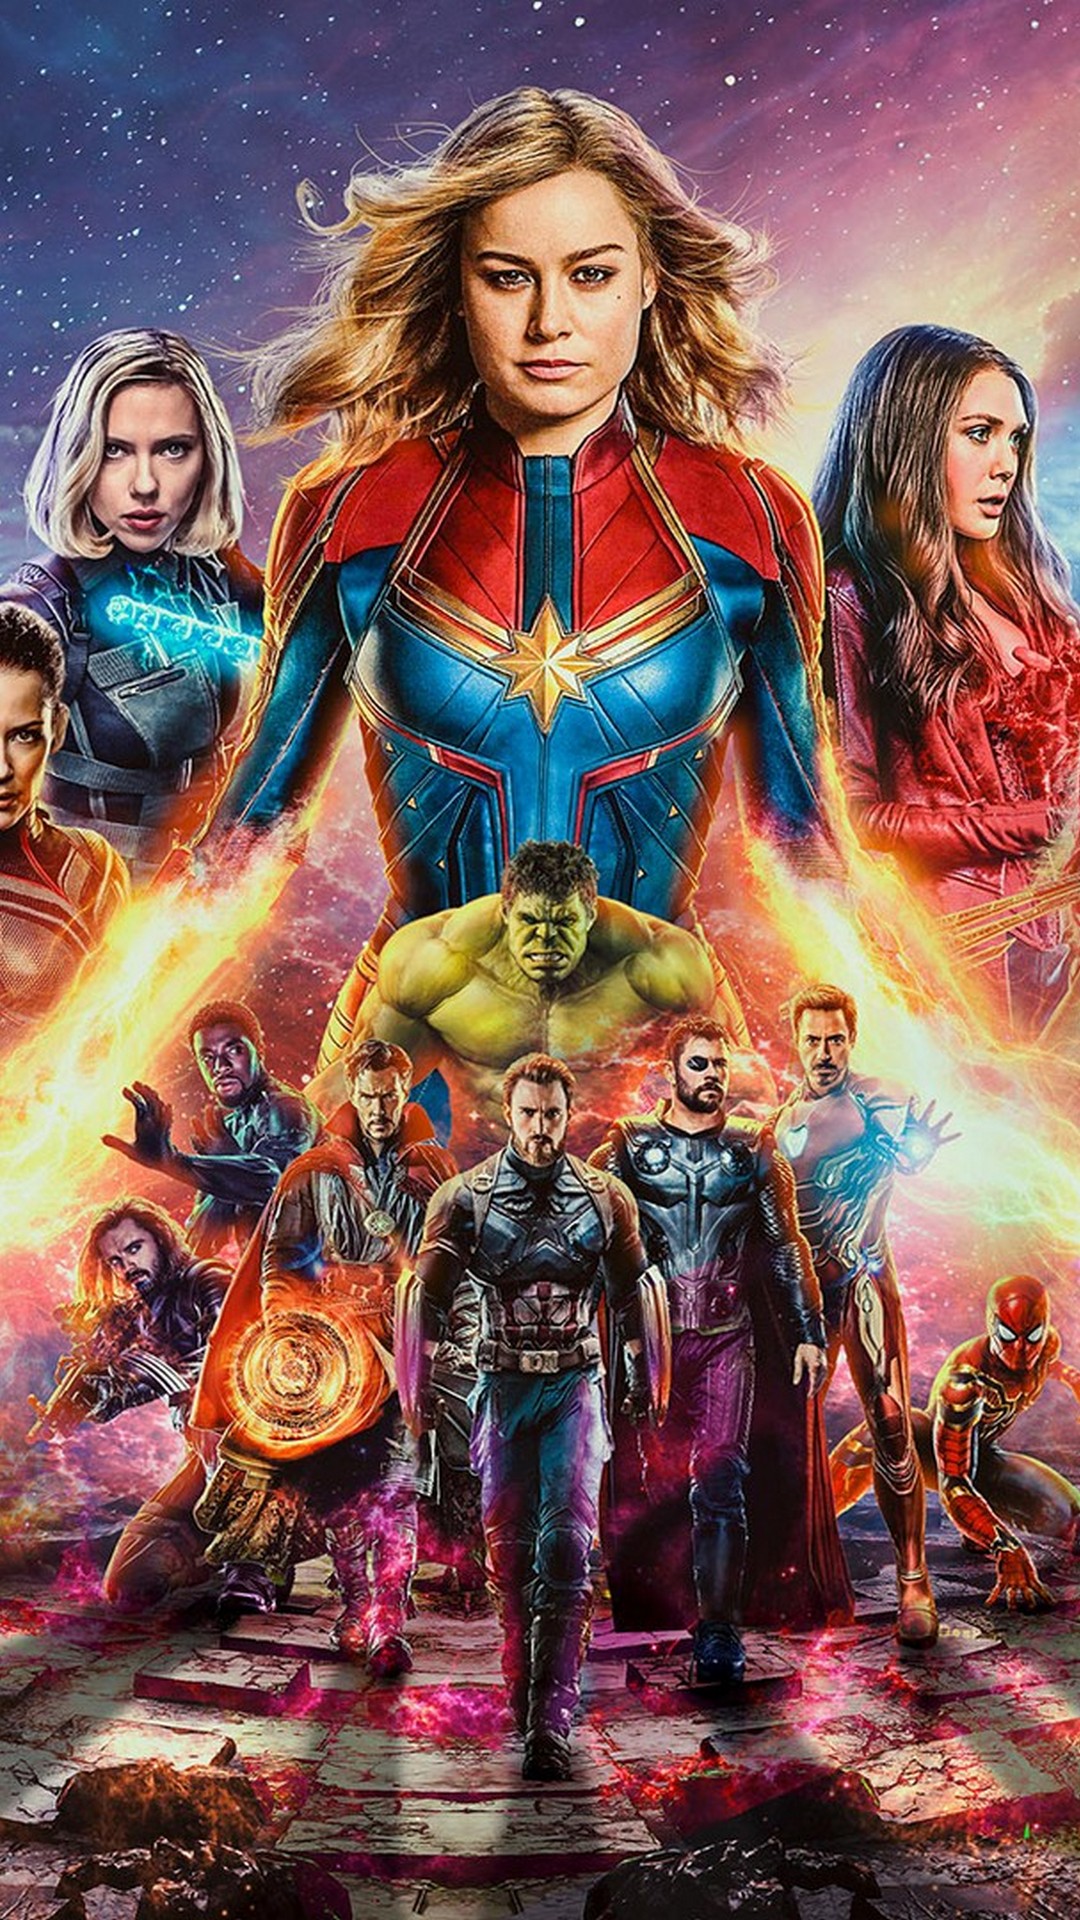 Avengers Endgame Iphone Wallpaper With High-resolution - Avengers Endgame Wallpaper Iphone , HD Wallpaper & Backgrounds